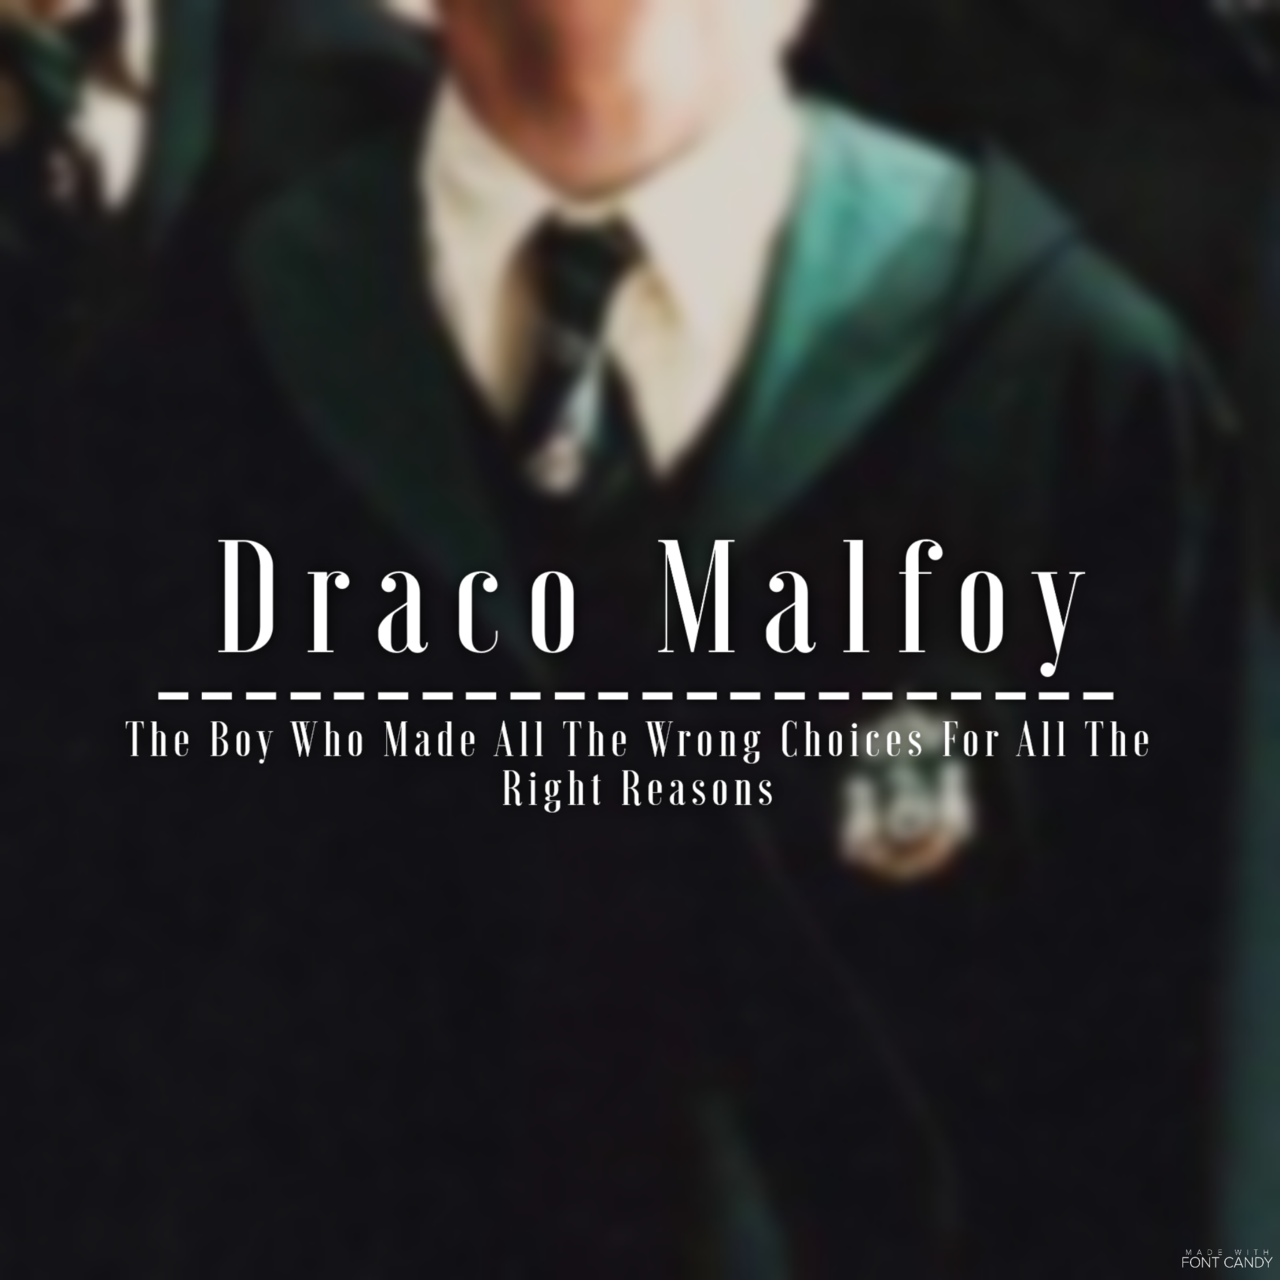 image about draco malfoy♥♥♥. See more about harry potter, draco malfoy and tom felton